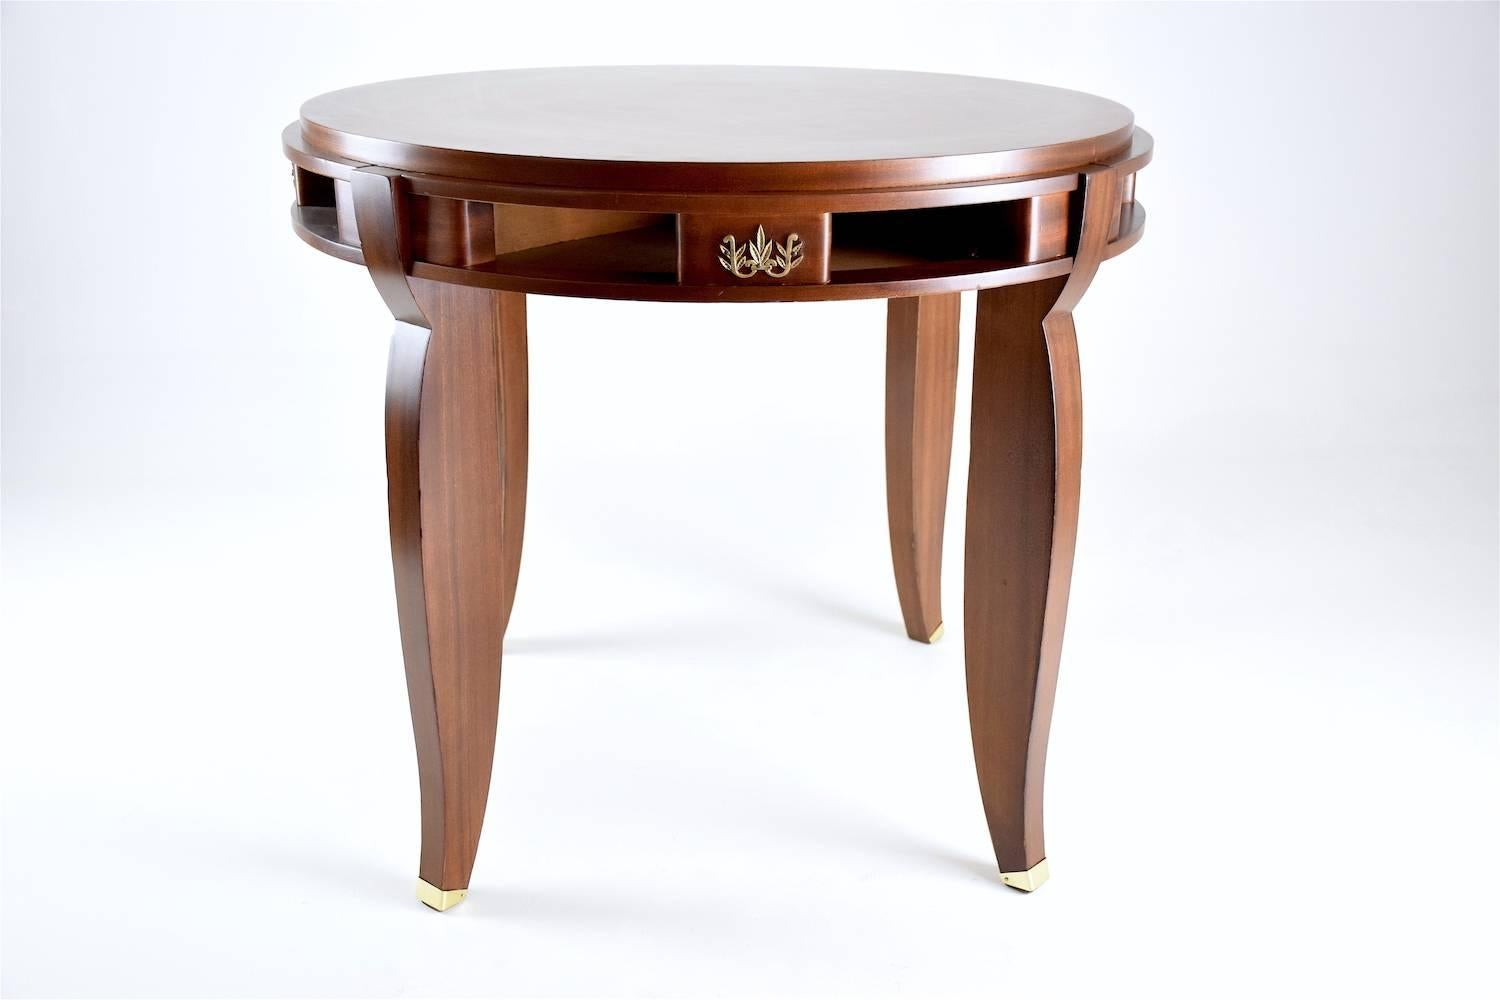 20th century vintage restored game table designed by one of the main precursor of Art Deco, Jules Leleu, circa 1930s. Elegant, large round gueridon or game table in rosewood and walnut veneer with inlaid parquetry, four brass leaf floral details,